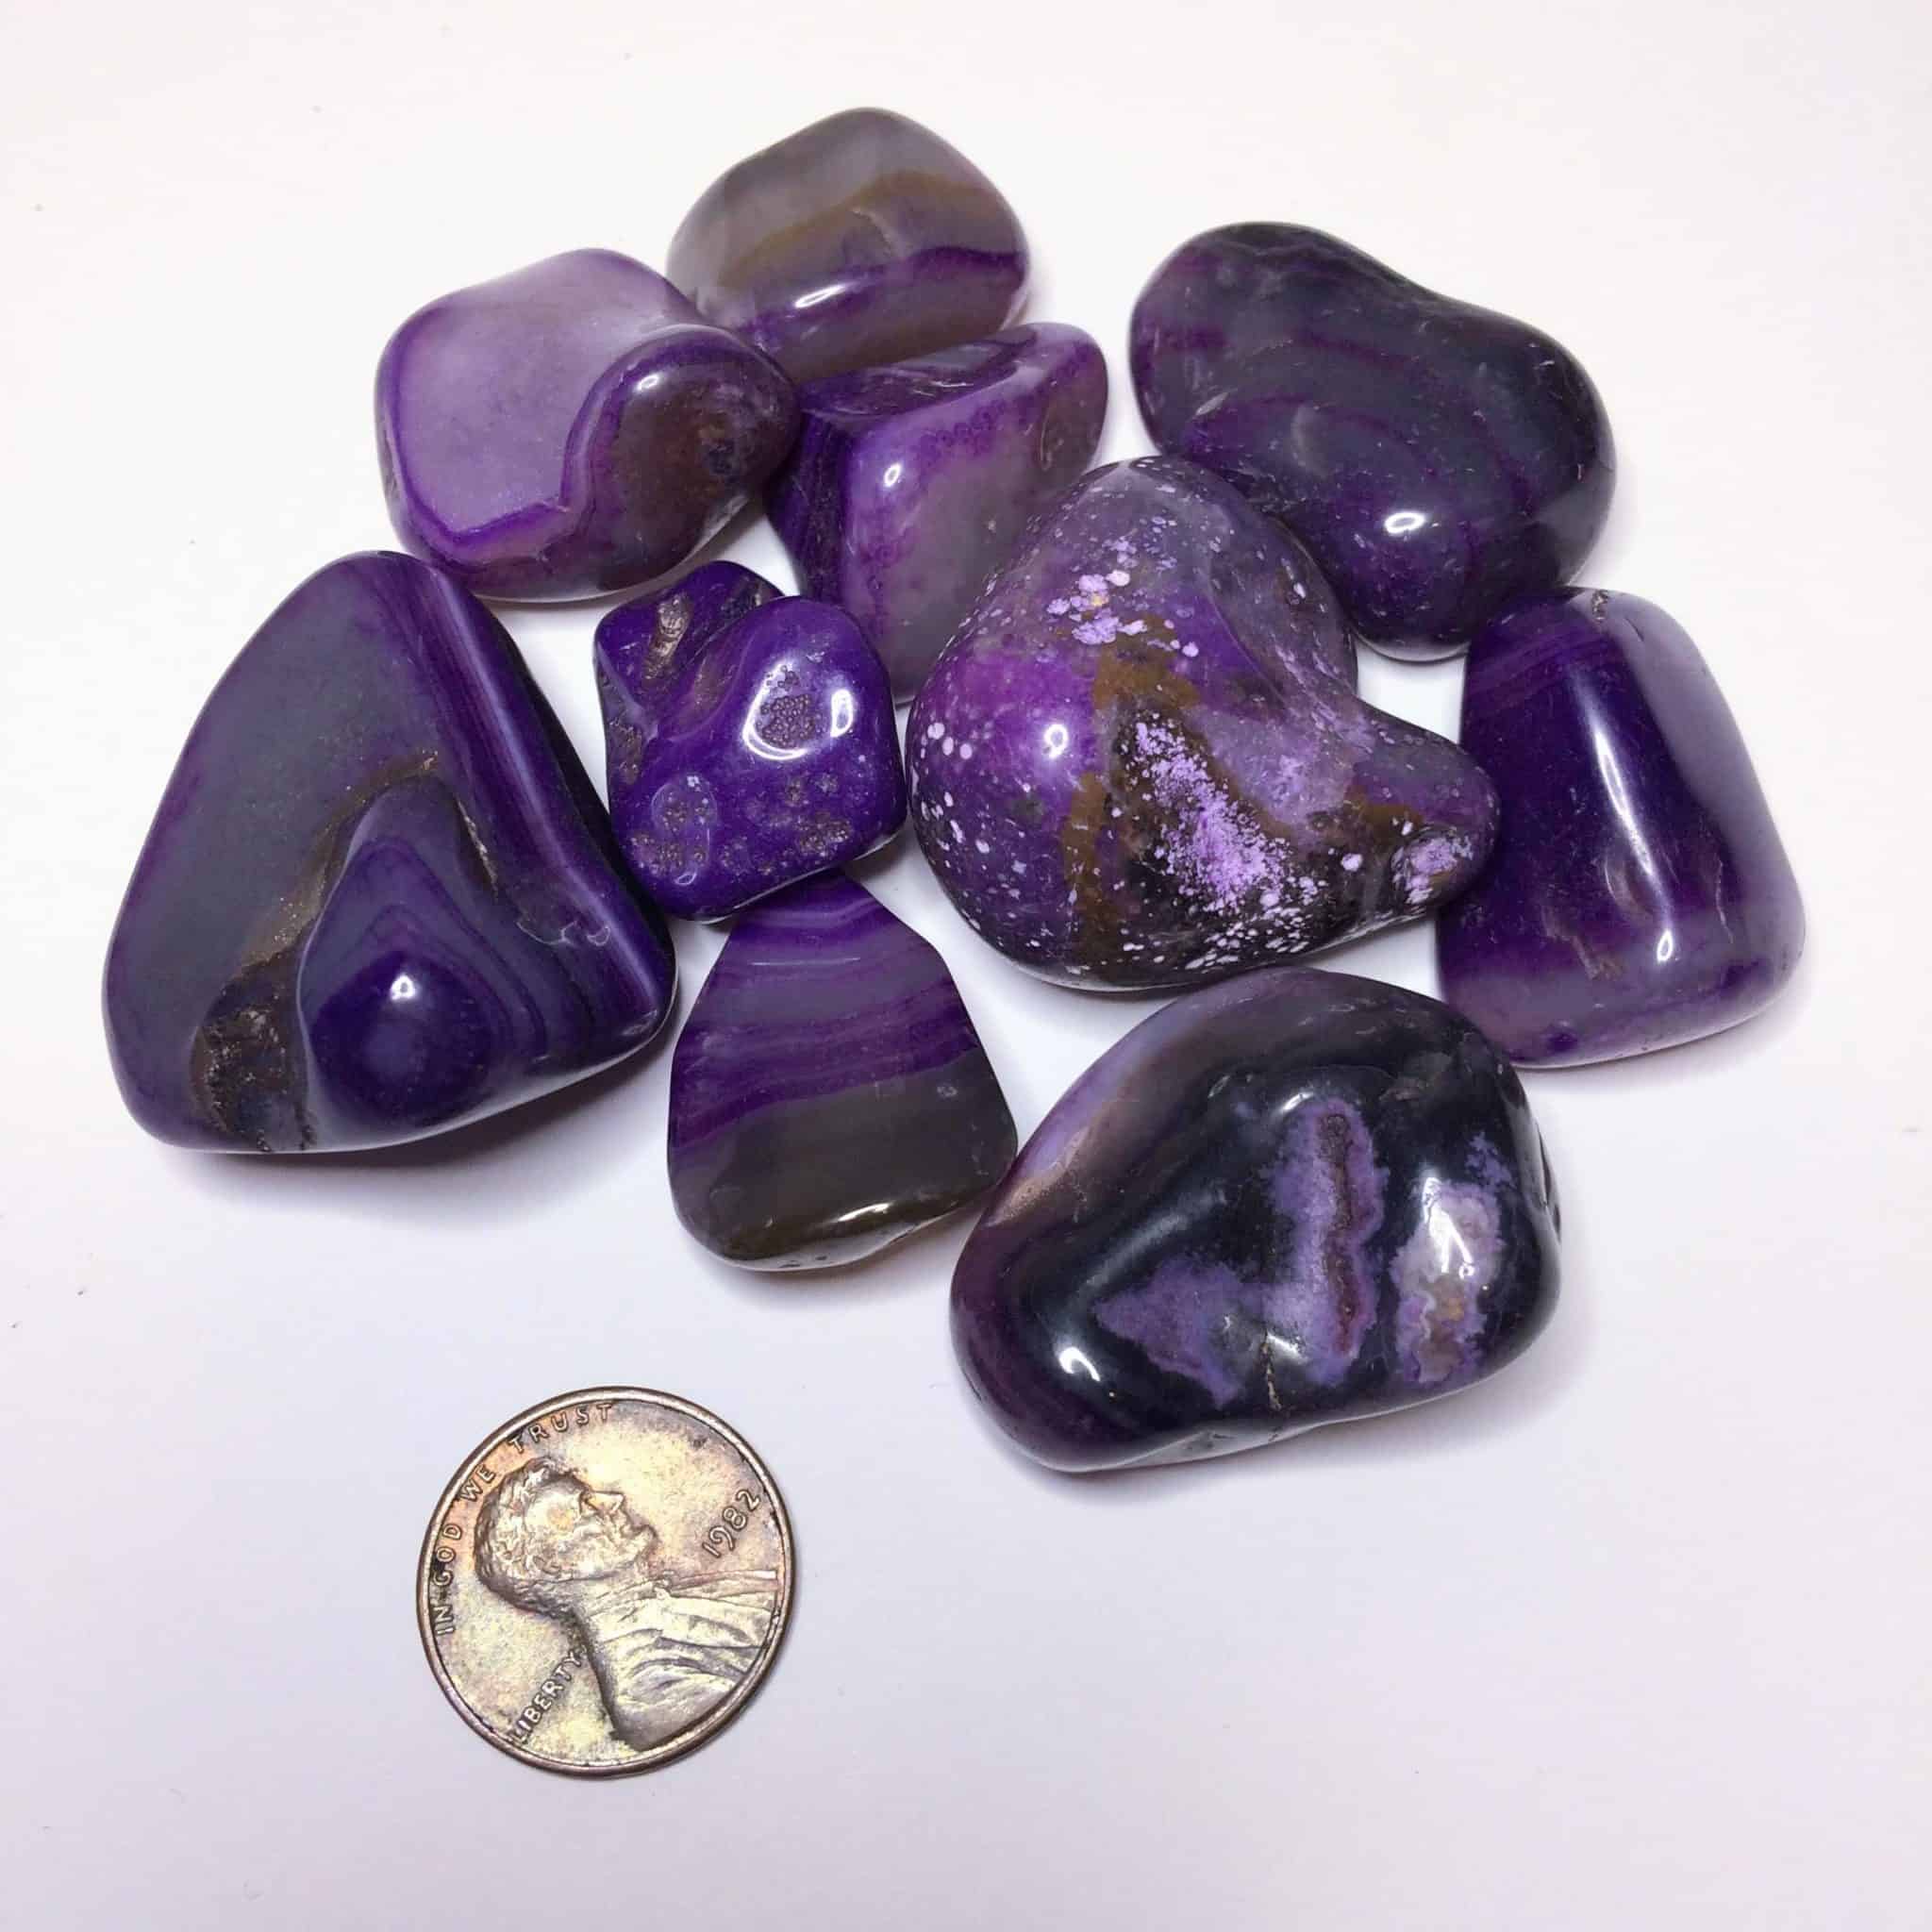 purple agate meaning